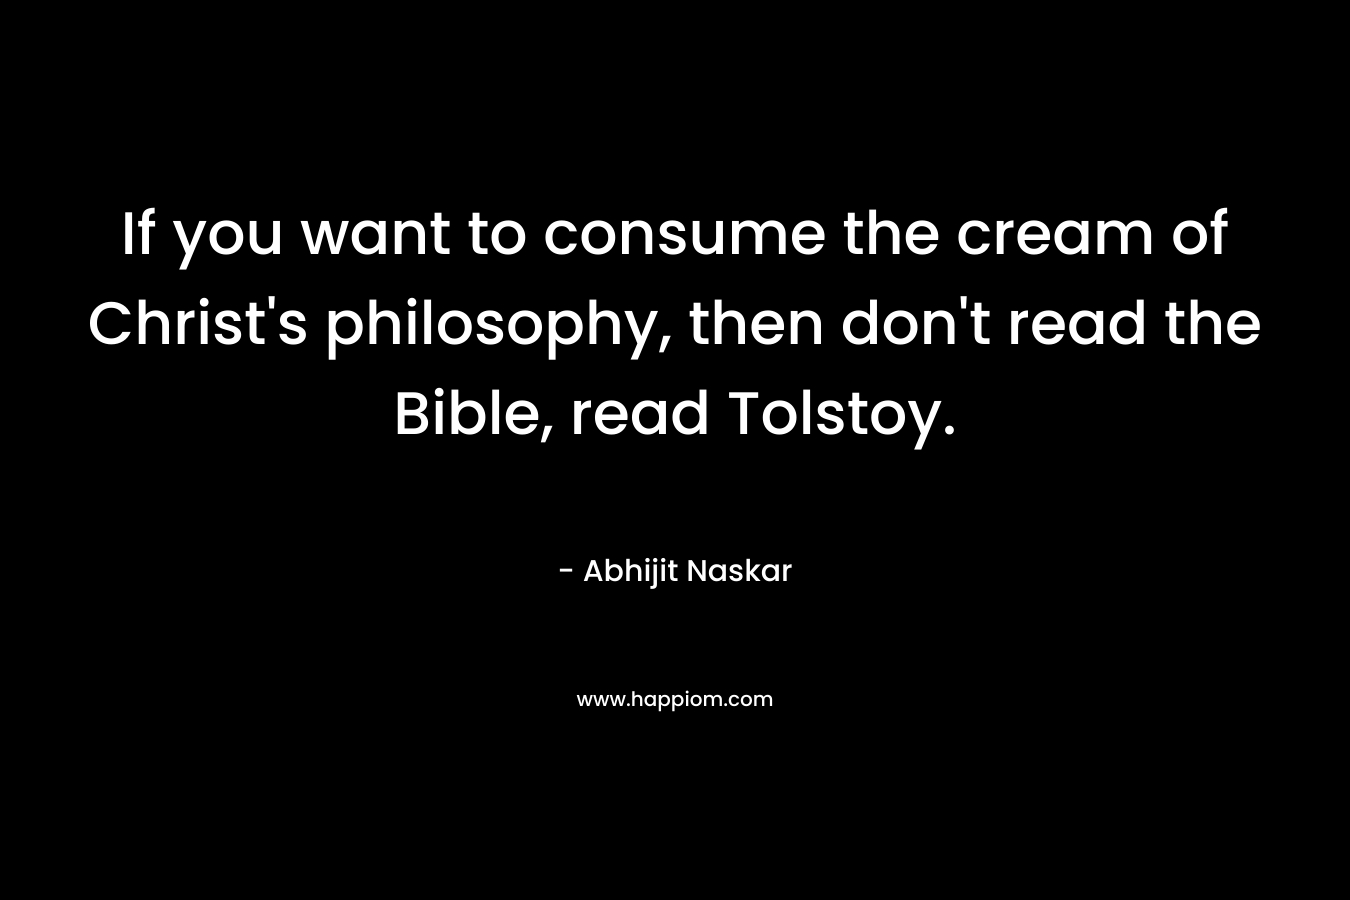 If you want to consume the cream of Christ's philosophy, then don't read the Bible, read Tolstoy.